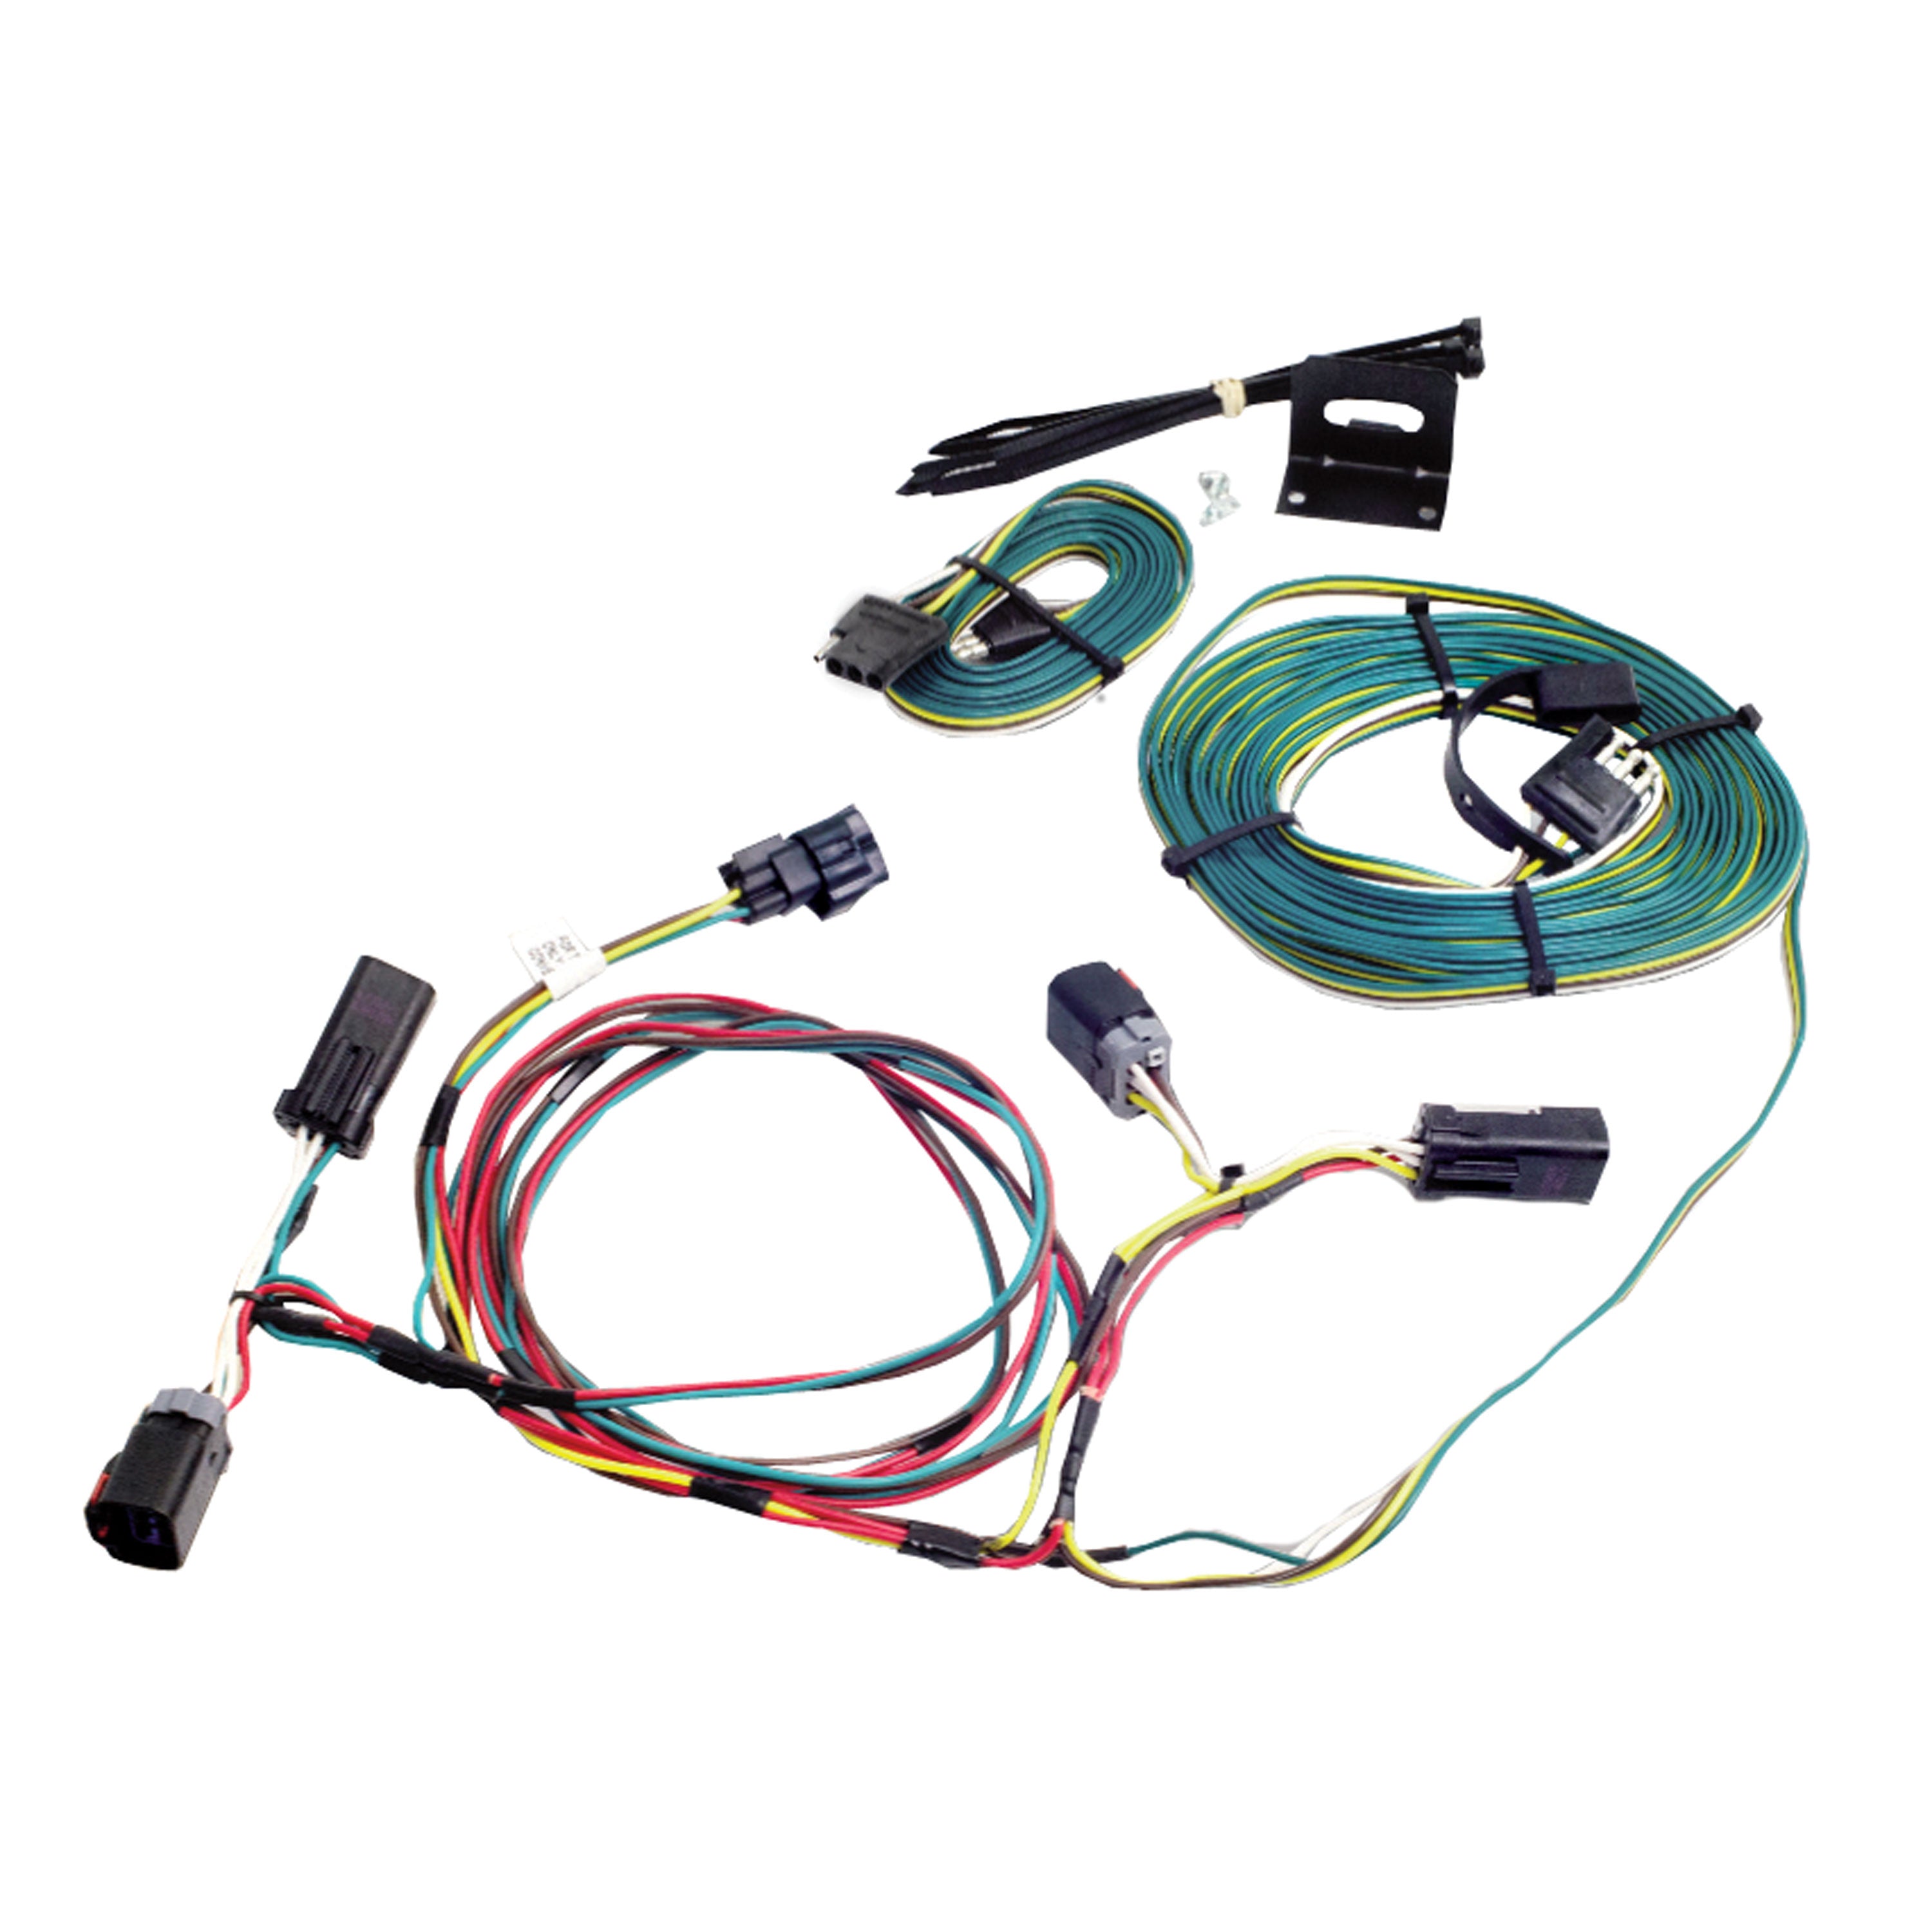 Demco 9523081 Towed Connector Vehicle Wiring Kit - For Ford Flex '09-'12